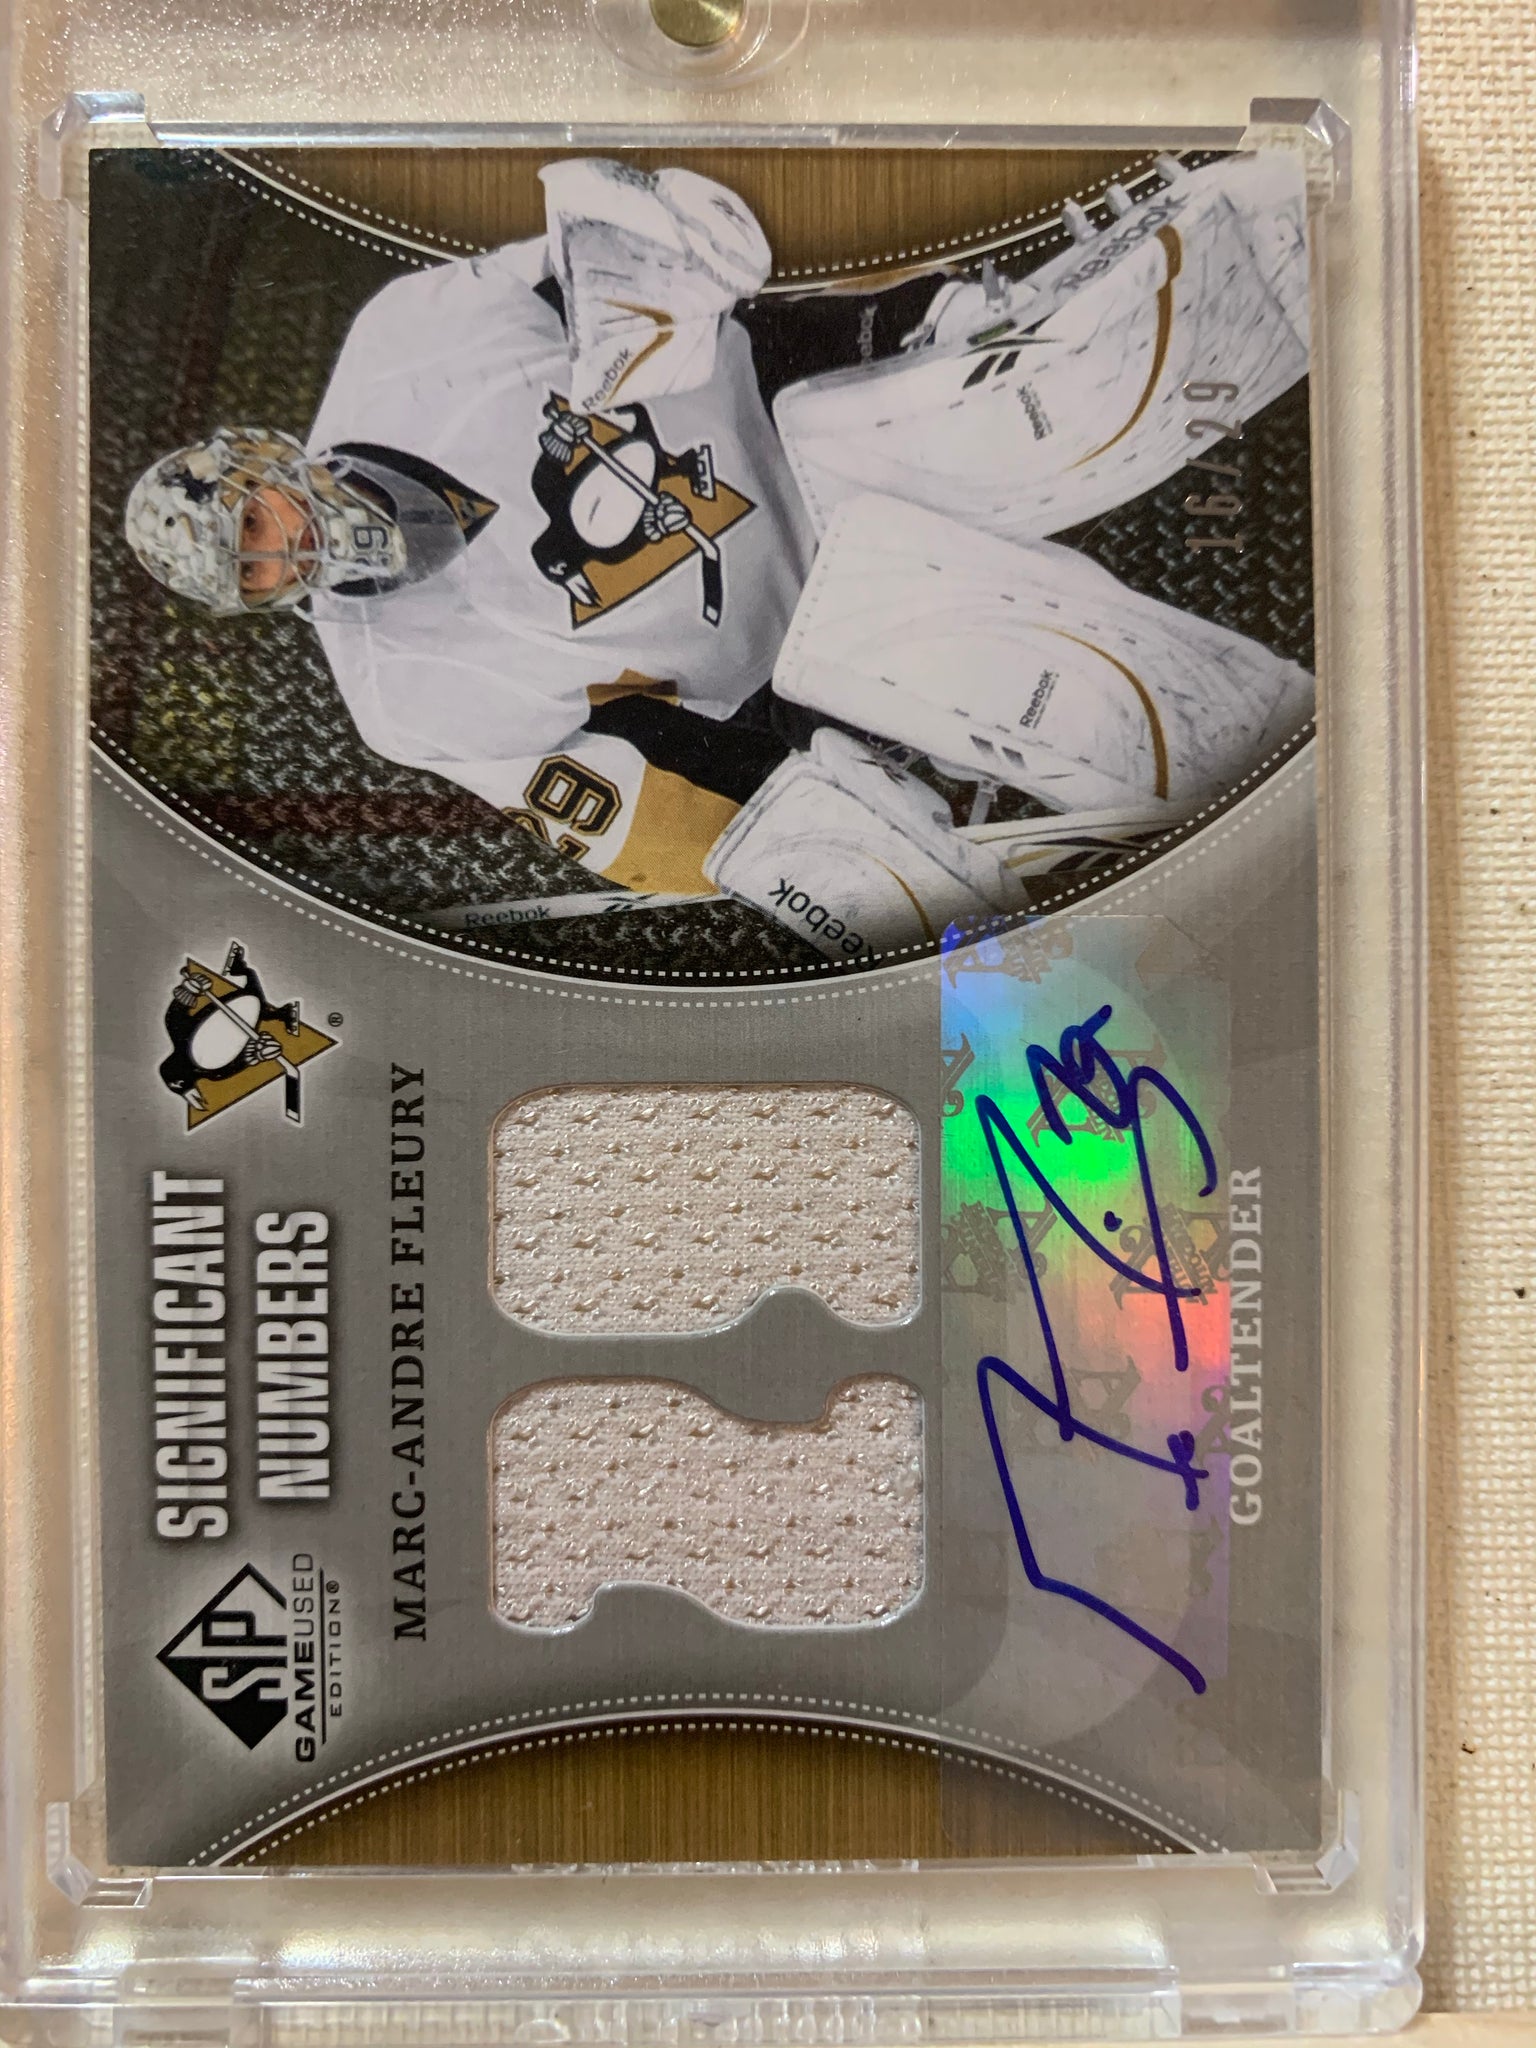 2009-10 SP GAME USED HOCKEY #SN-MF PITTSBURGH PENGUINS - MARC ANDRE FLEURY SIGNIFICANT NUMBERS AUTO JERSEY CARD SERIAL NUMBERED 16/29